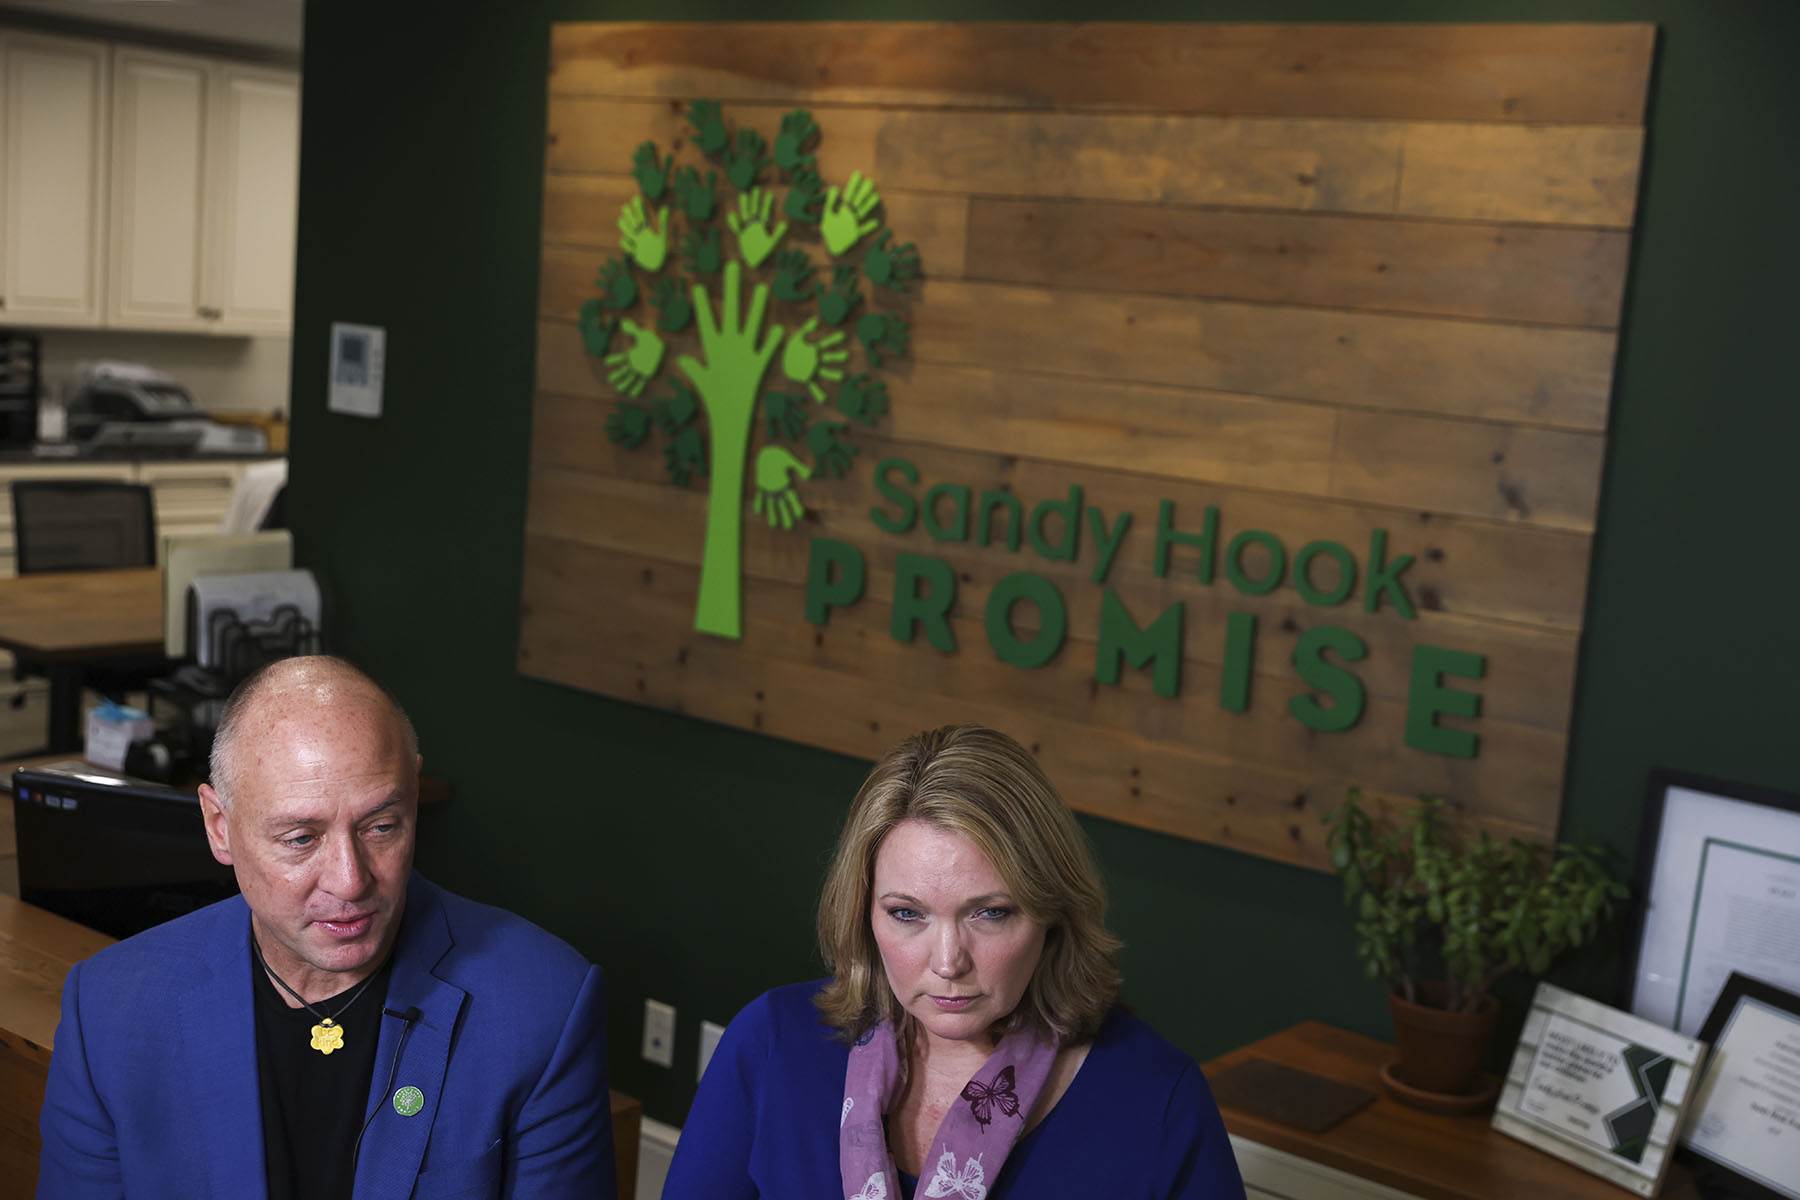 Mark Barden and Nicole Hockley, co-founders and CEOs of Sandy Hook Promise Foundation